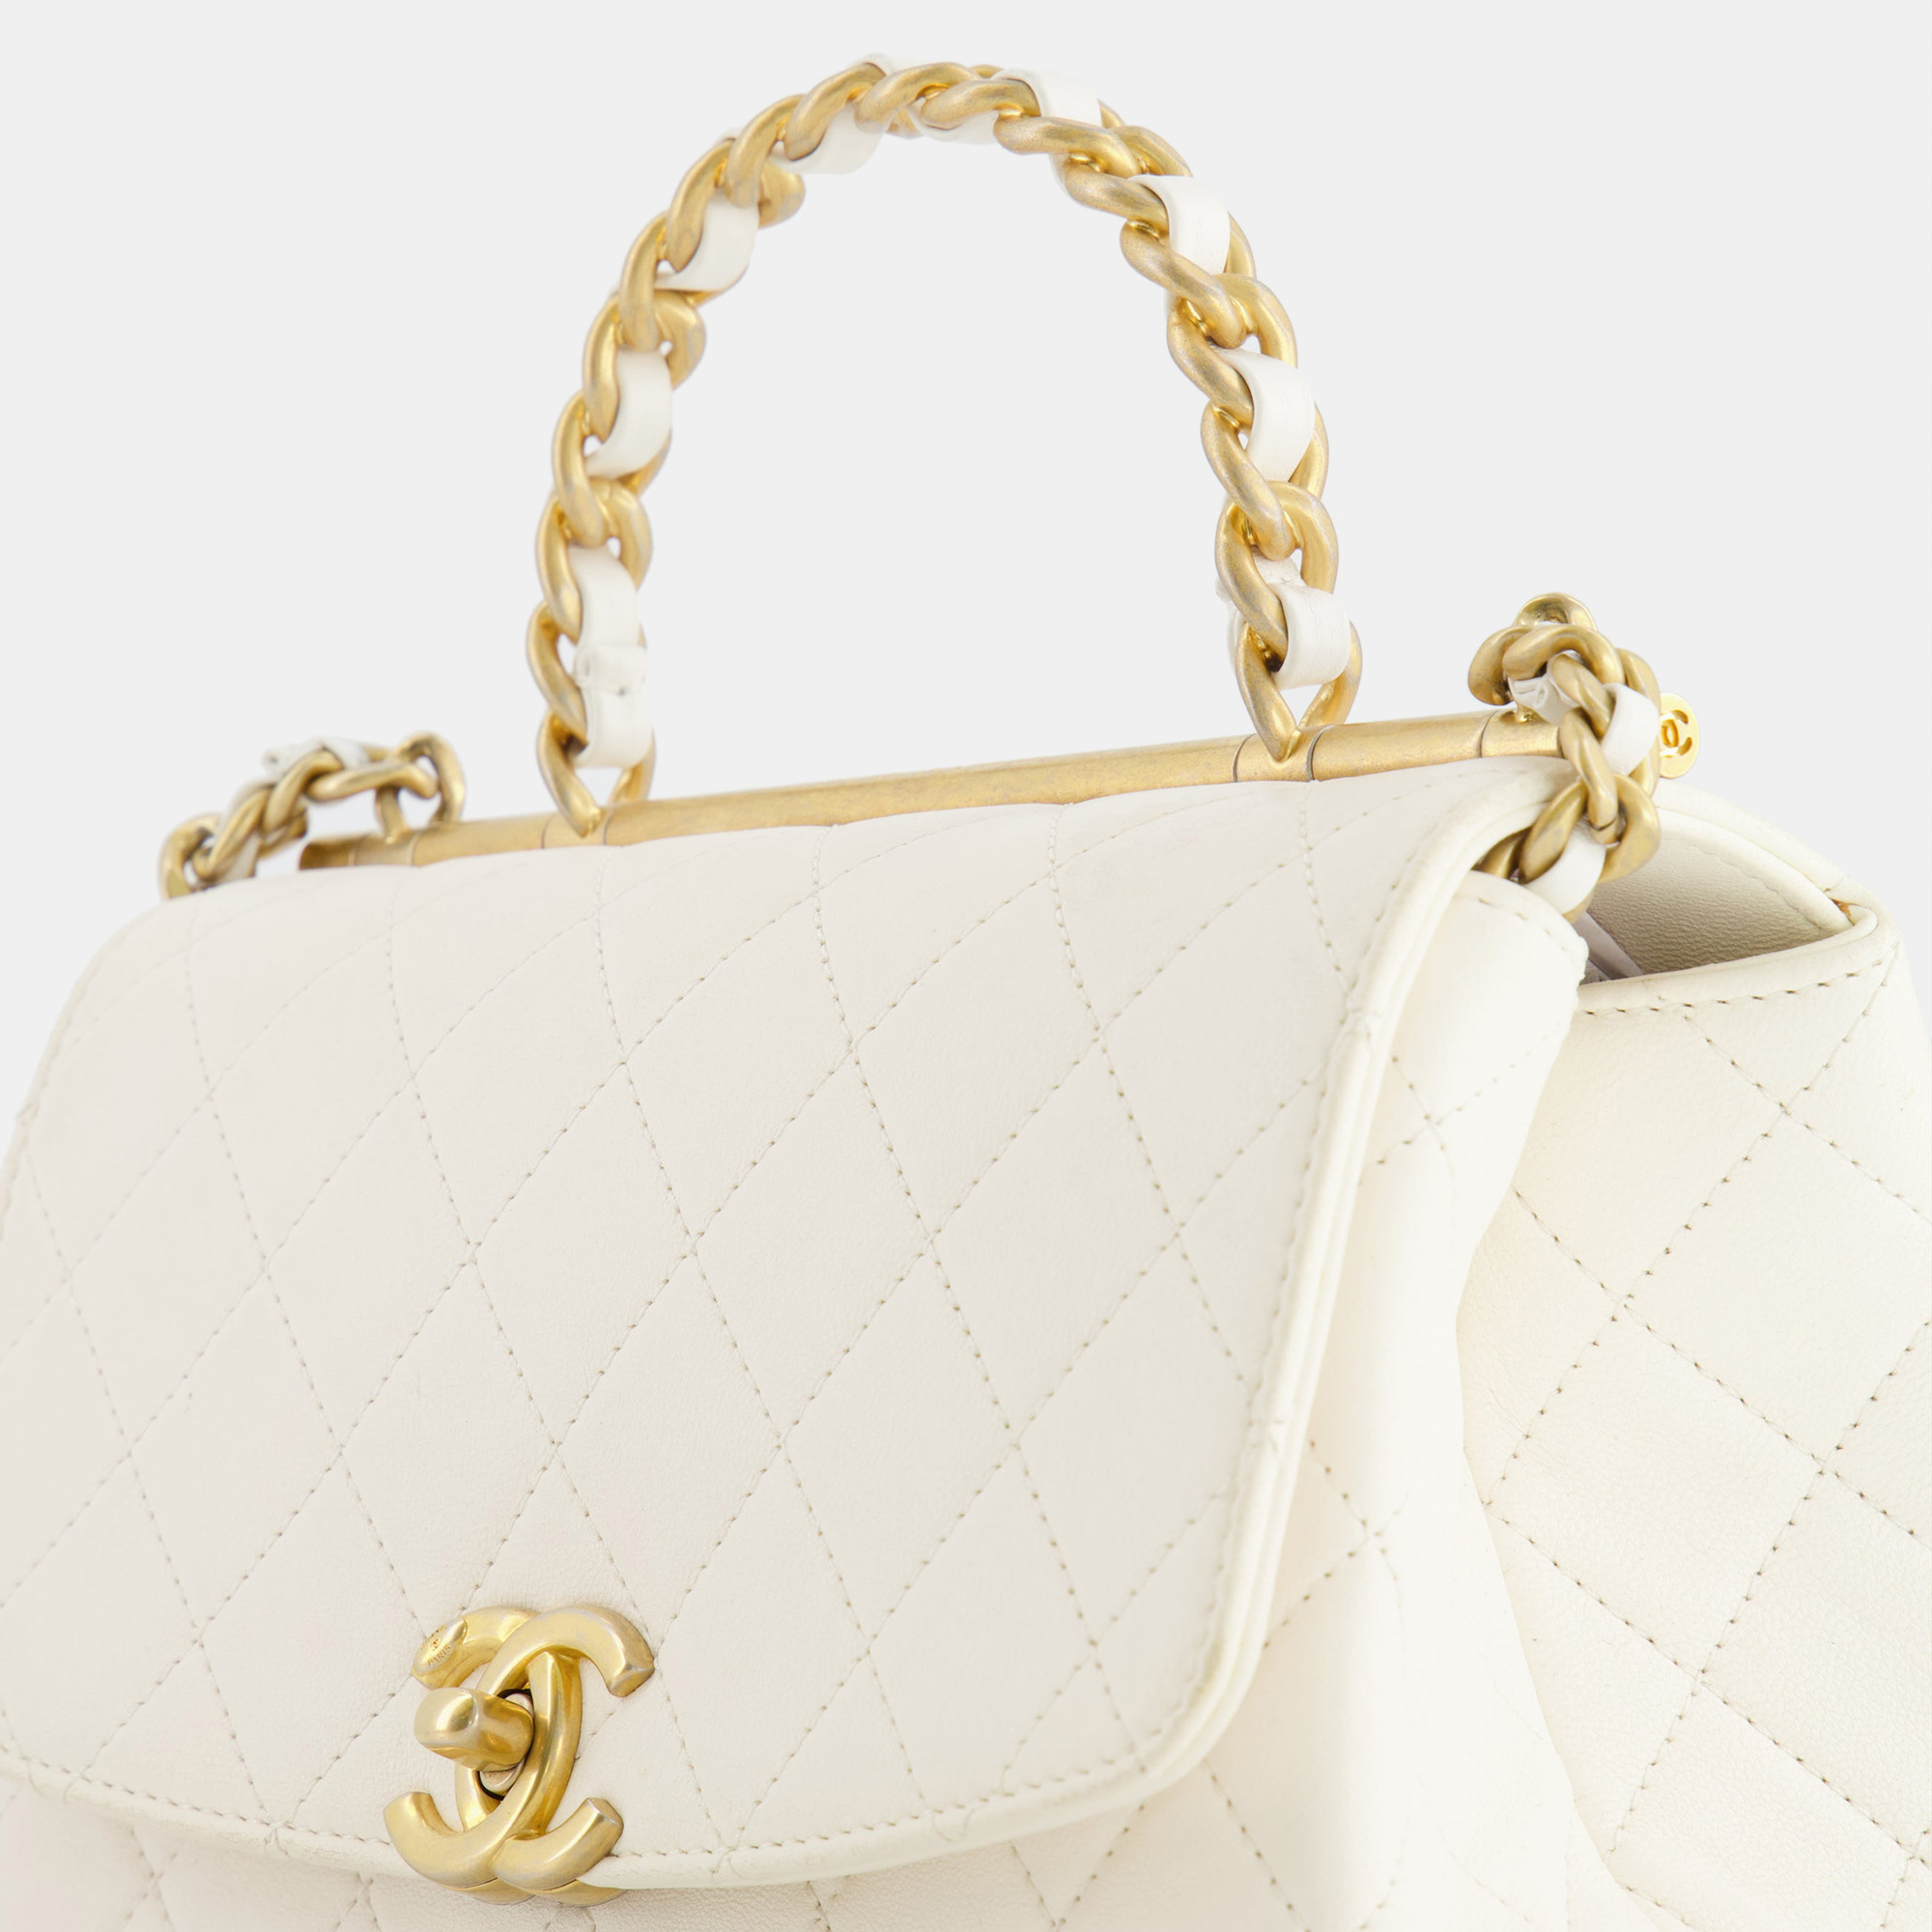 Chanel White Lambskin Leather Small Flap Bag With Brushed Gold Chain Top Handle